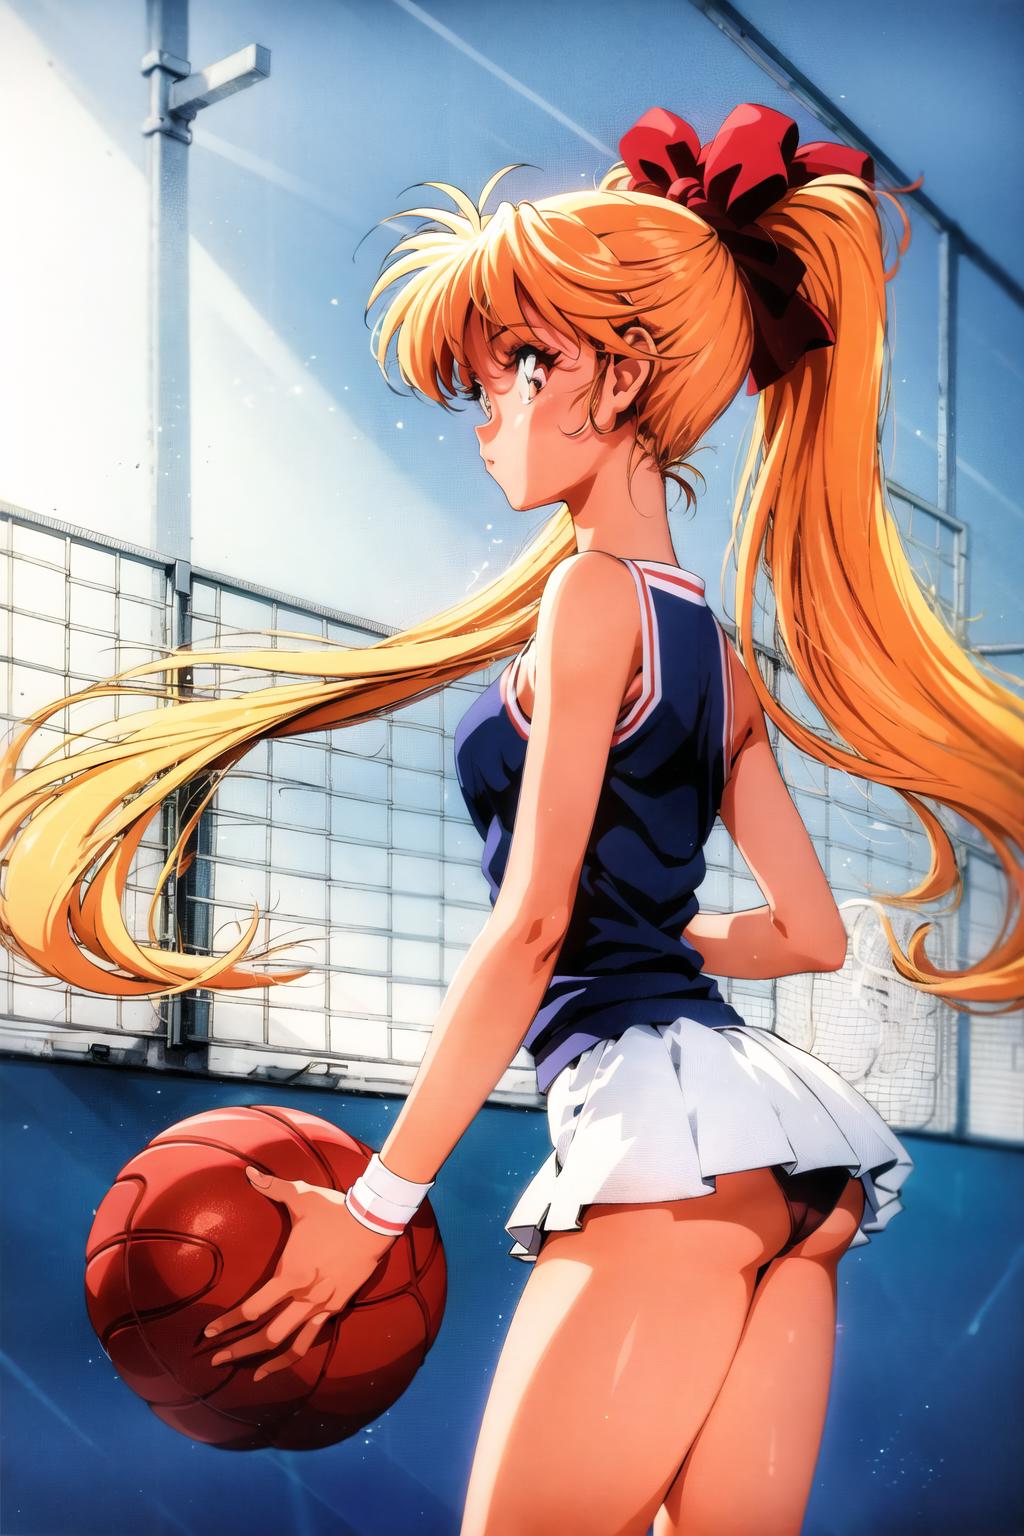 Anime girl holding a basketball while wearing a blue and red uniform.